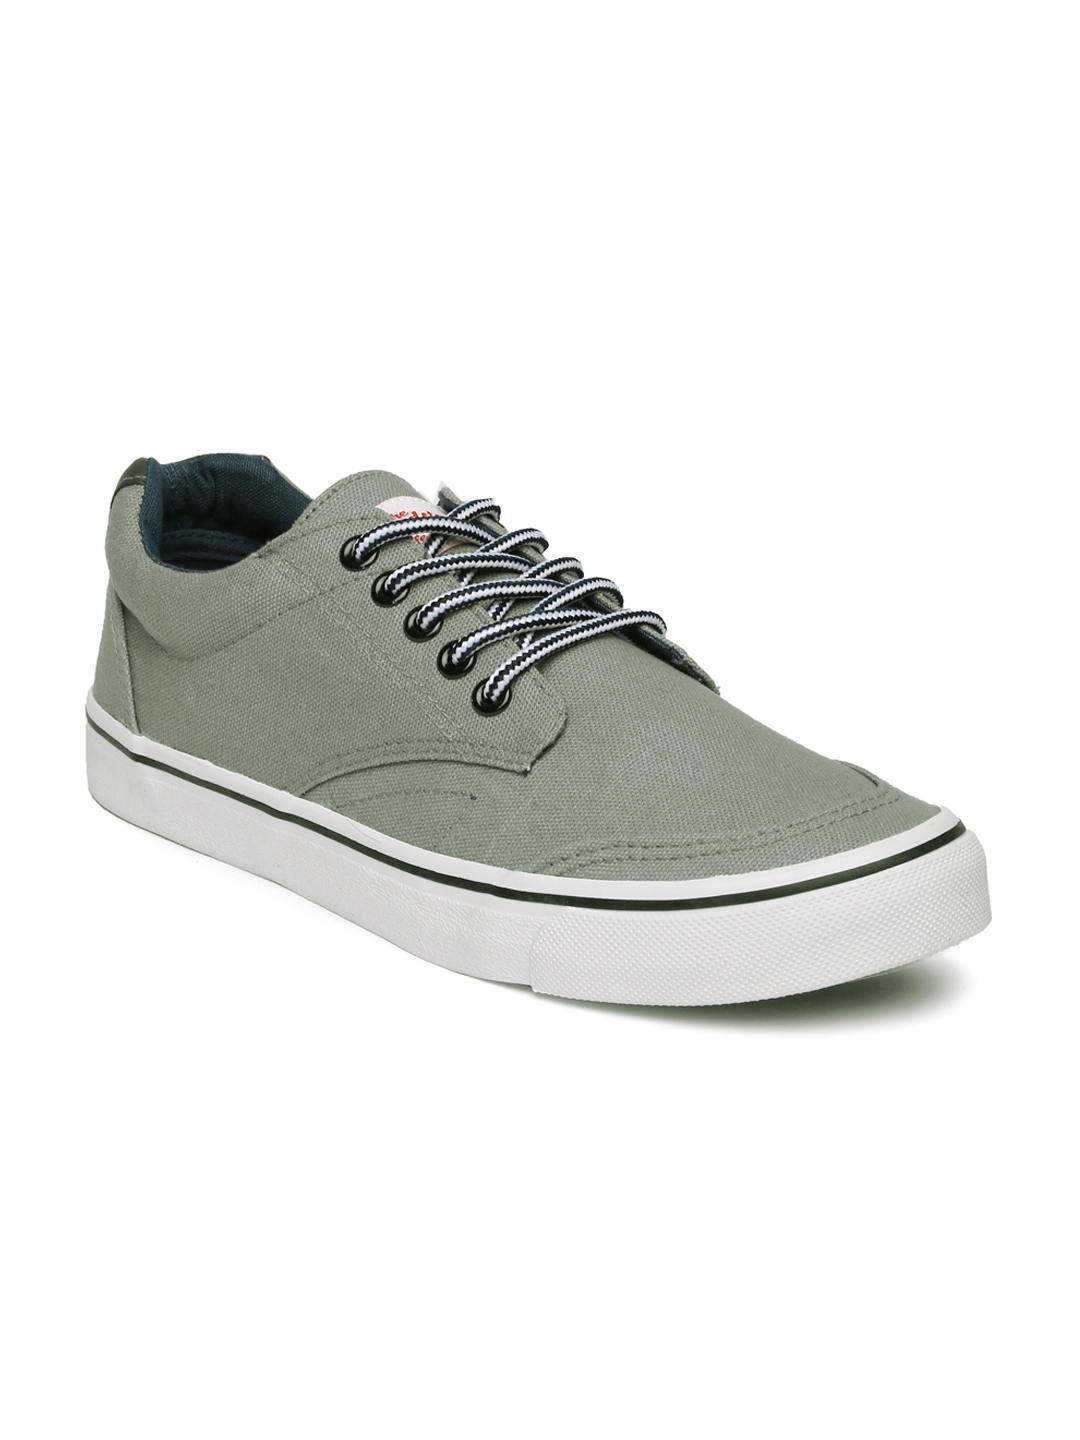 Buy Roadster Unisex Grey Casual Shoes - Casual Shoes for Unisex 851558 ...